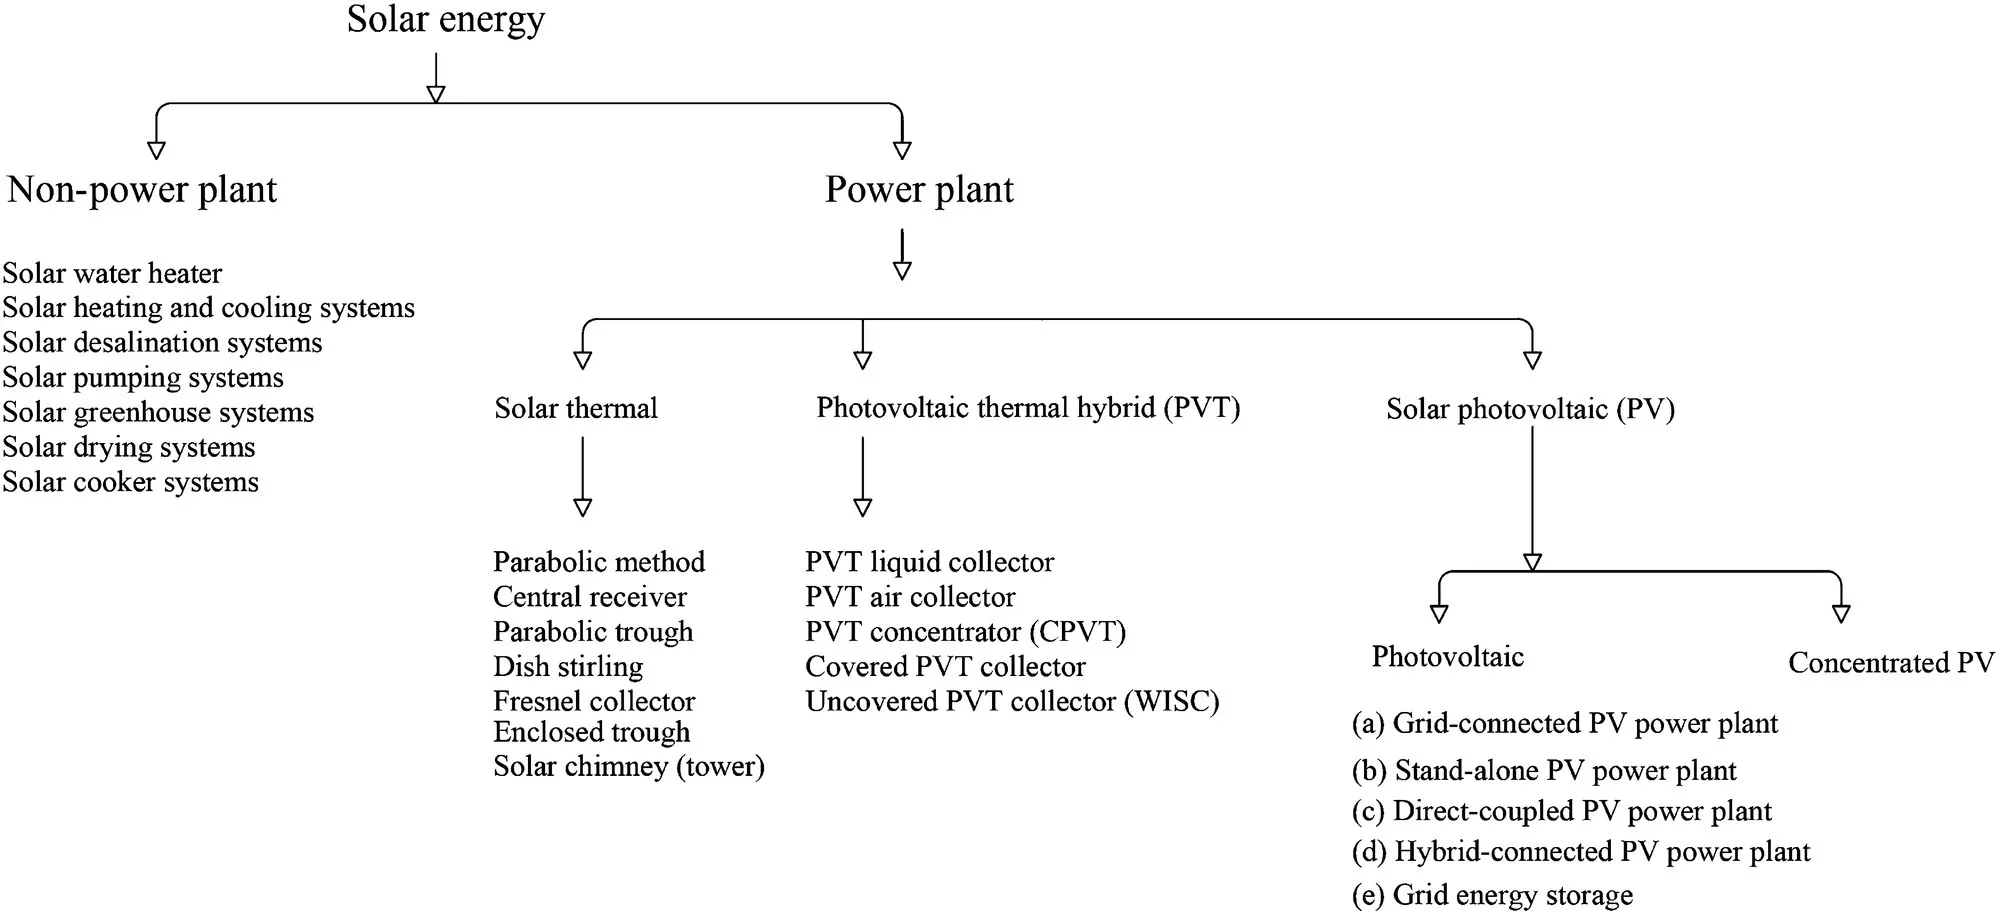 Schematic illustration of various solar power plant categories.